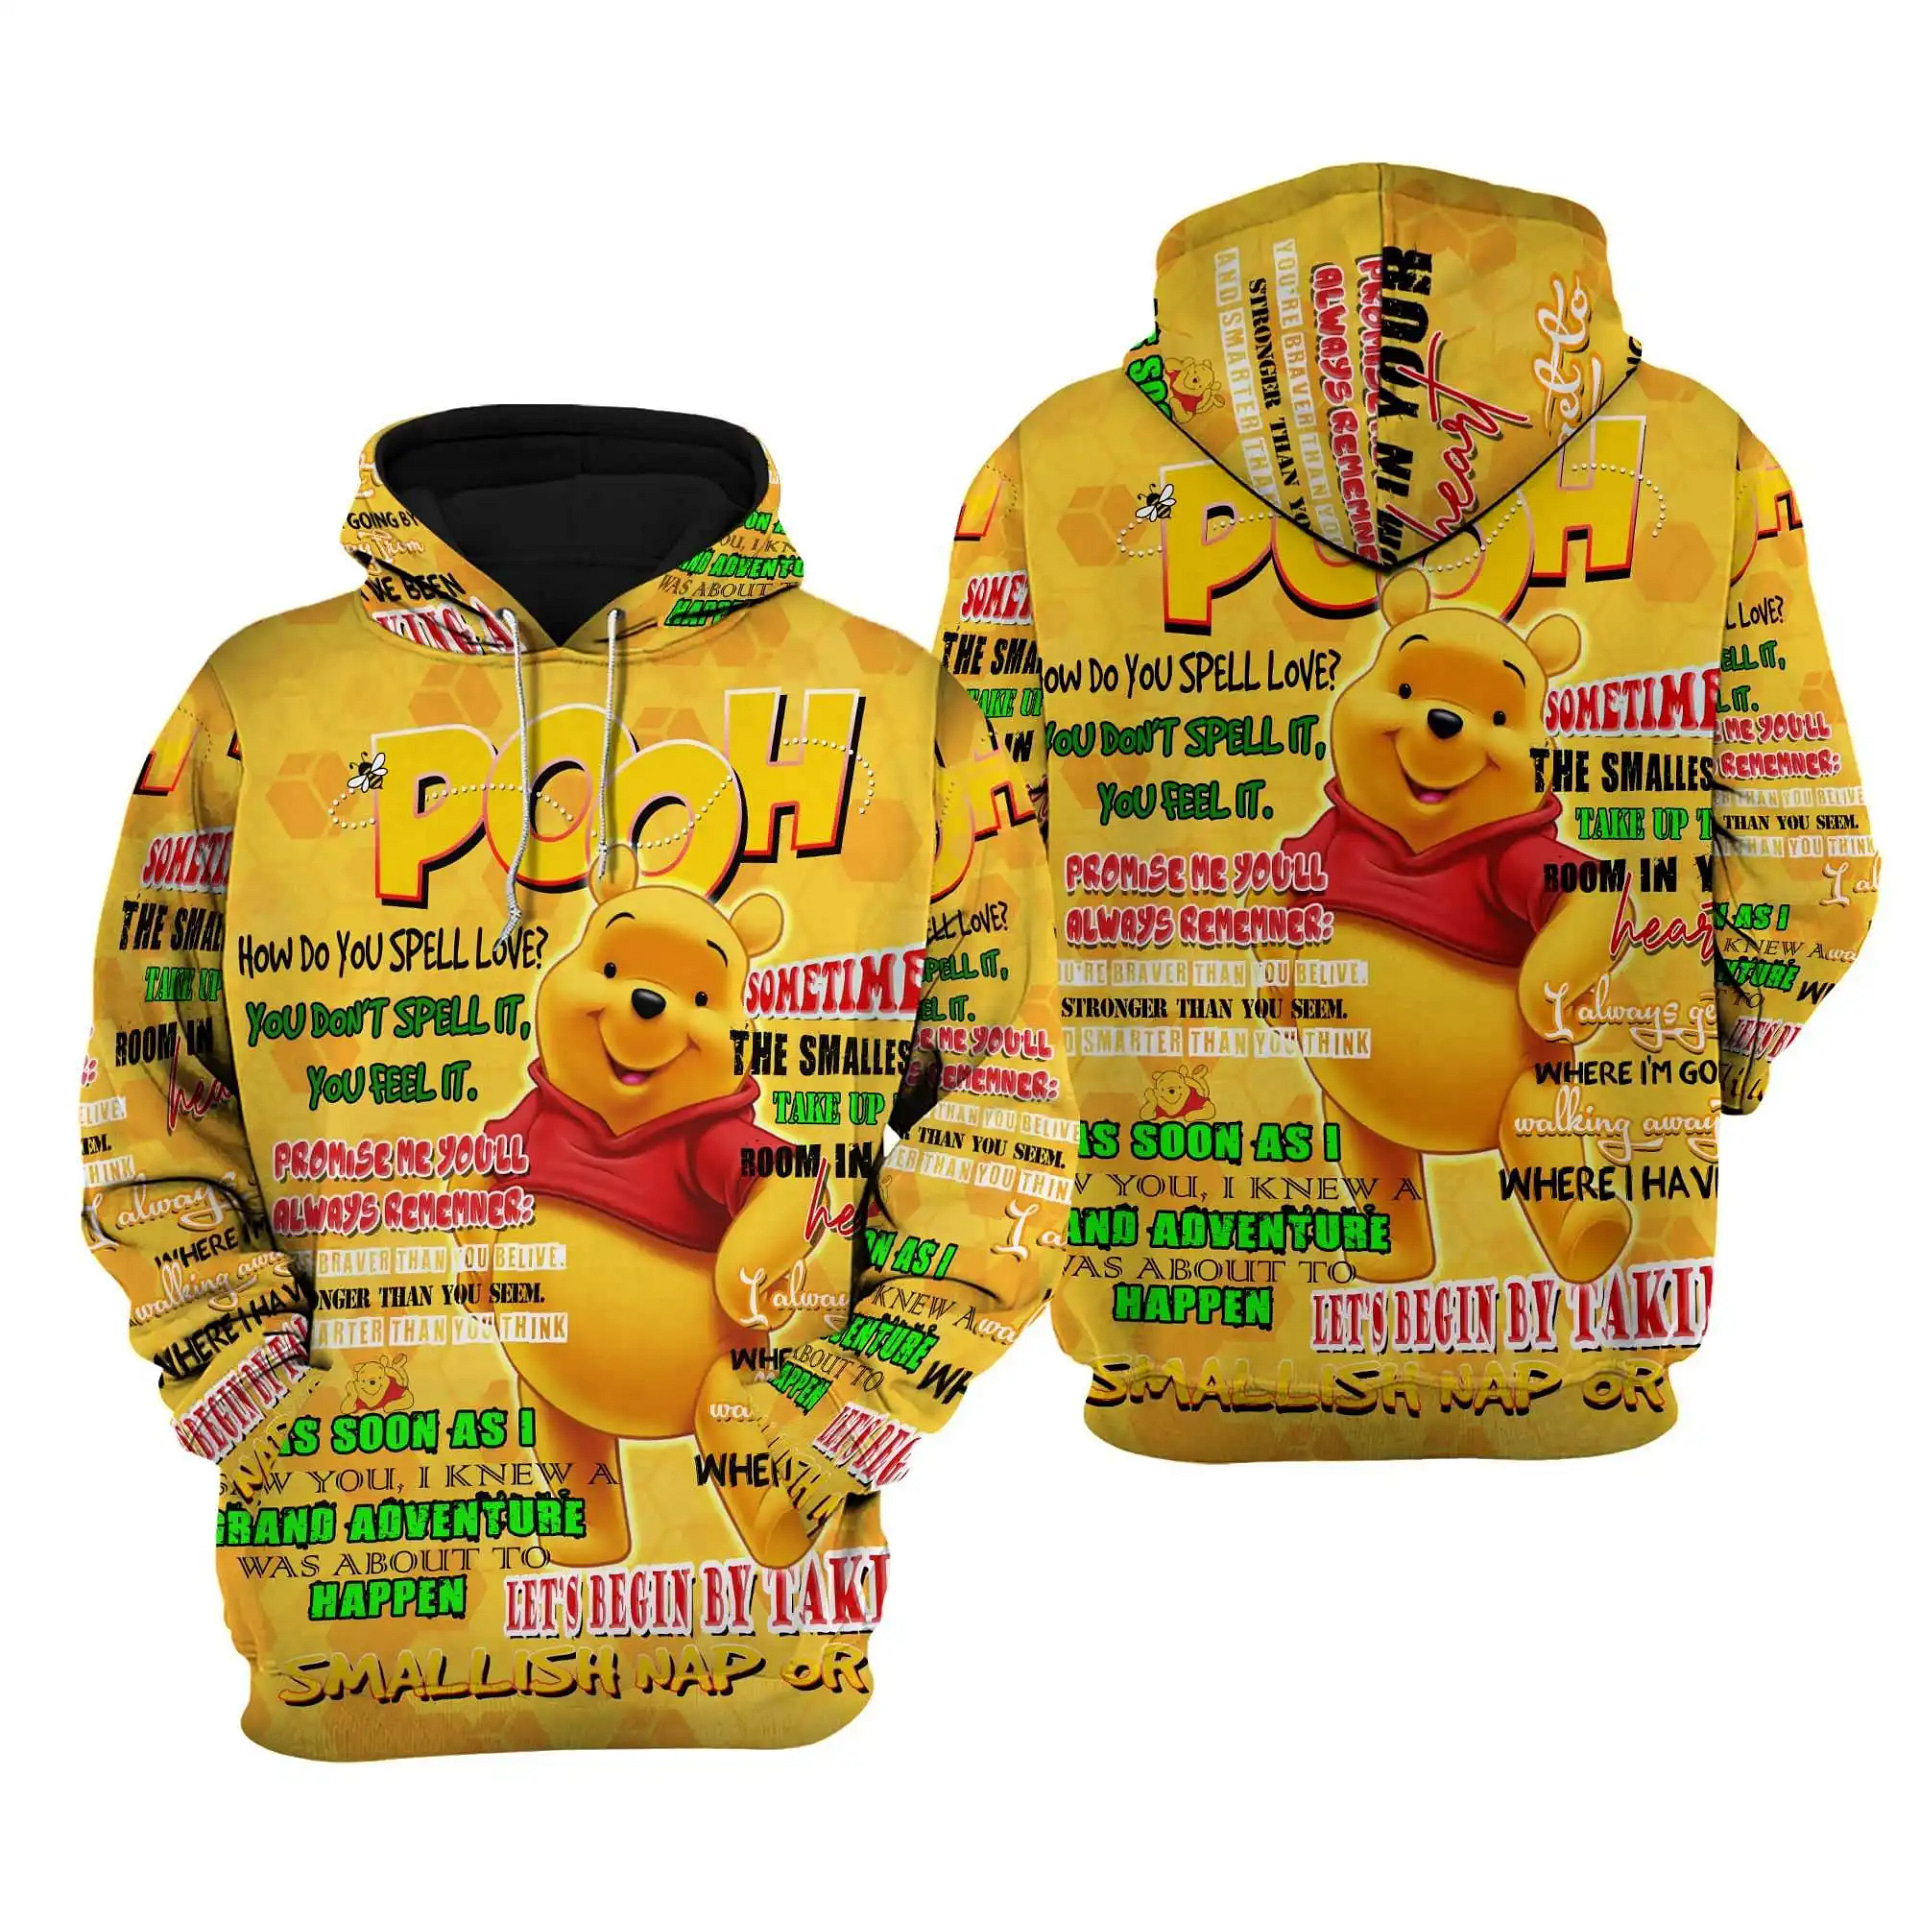 Winnie Pooh Punk Words Pattern Disney Quotes Cartoon Graphic Outfits Clothing Men Women Kids Toddlers Hoodie 3D